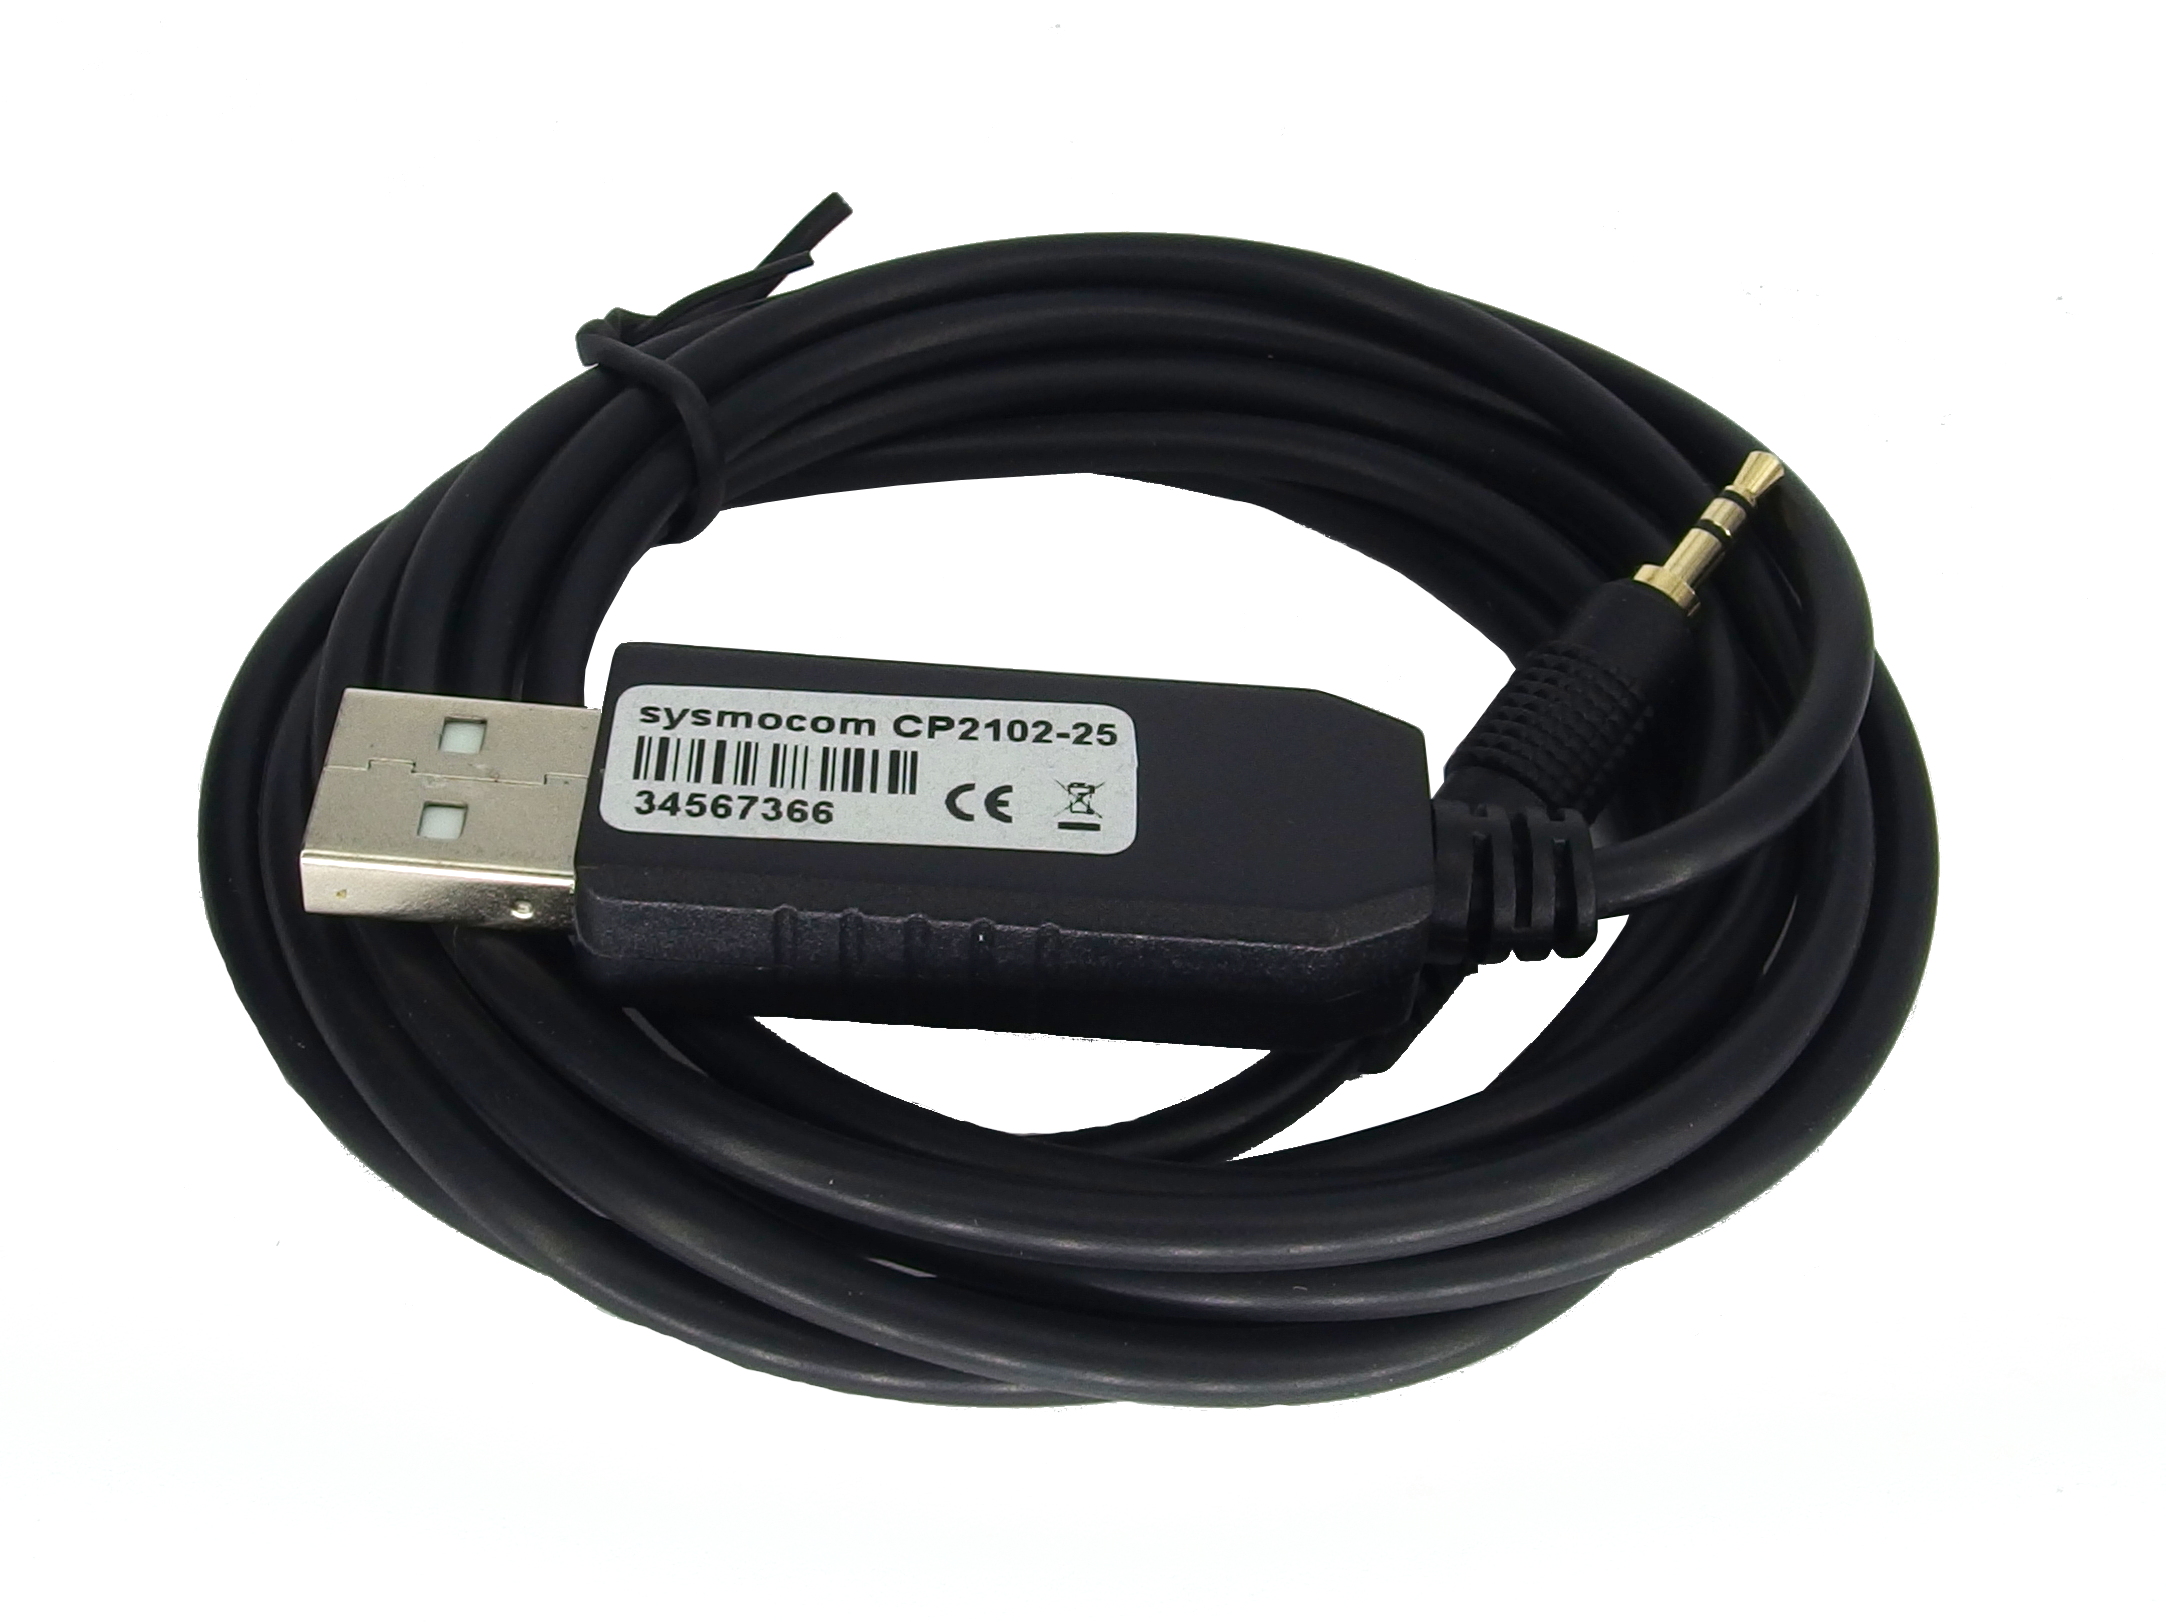 Sysmocom USB serial cable (CP2102) with 2.5mm stereo jack